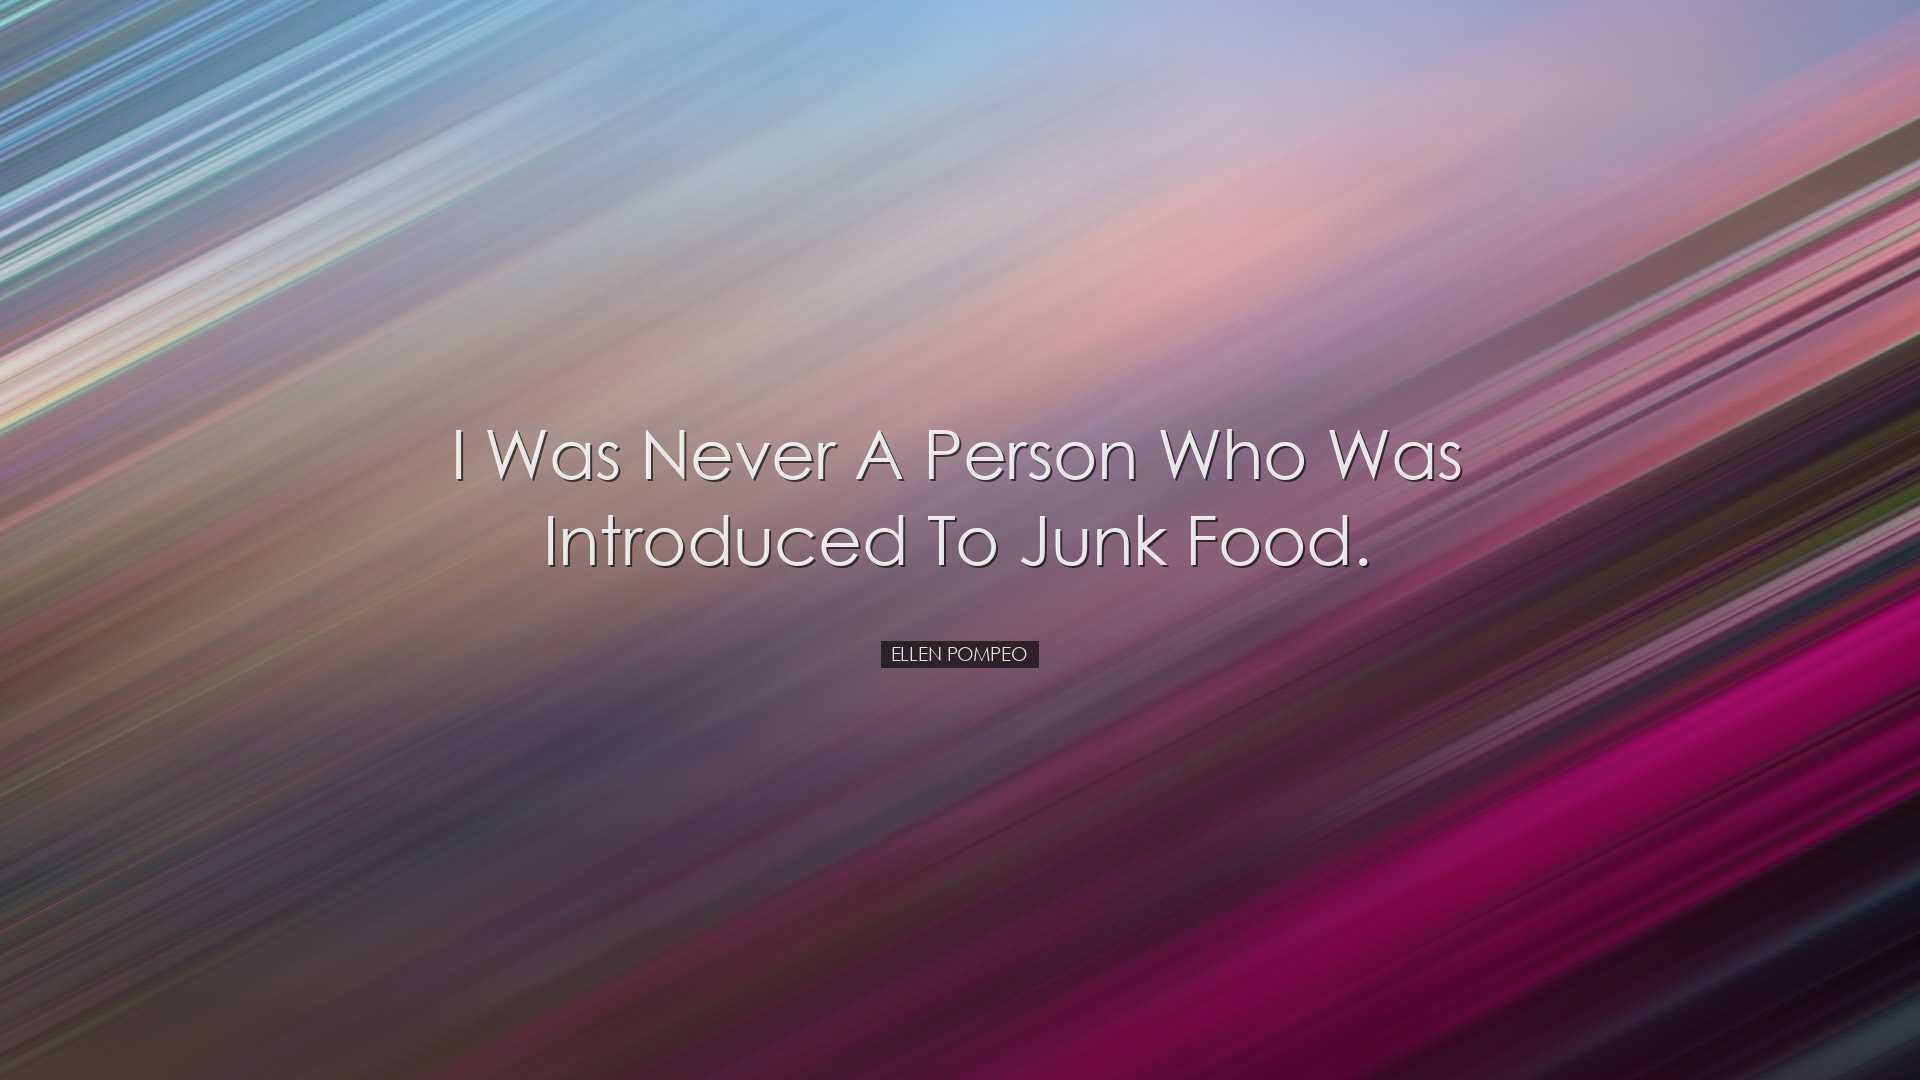 I was never a person who was introduced to junk food. - Ellen Pomp